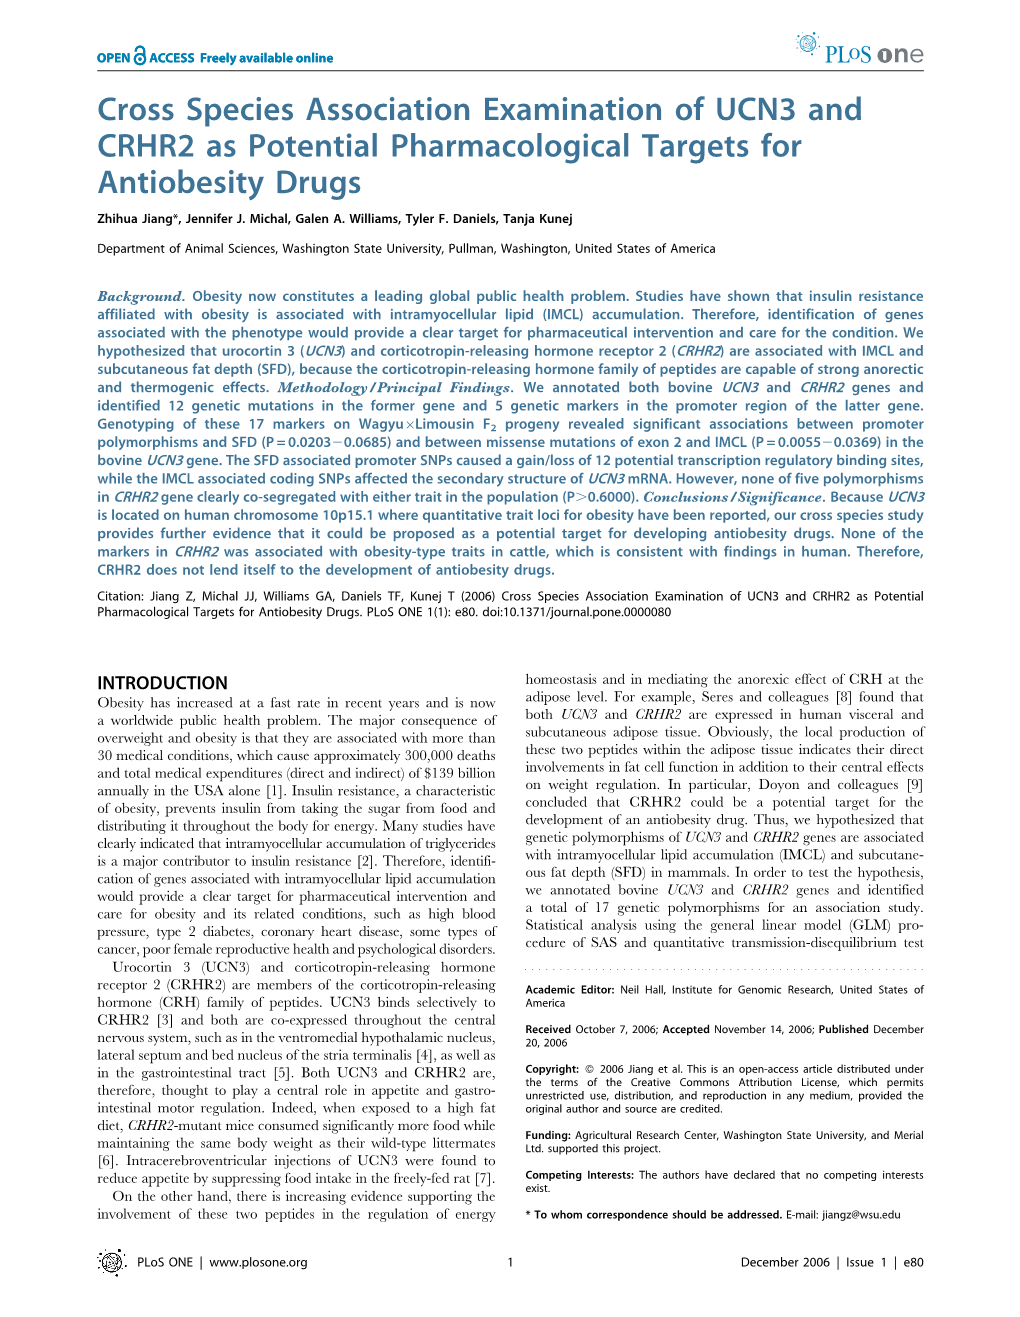 Cross Species Association Examination of UCN3 and CRHR2 As Potential Pharmacological Targets for Antiobesity Drugs Zhihua Jiang*, Jennifer J